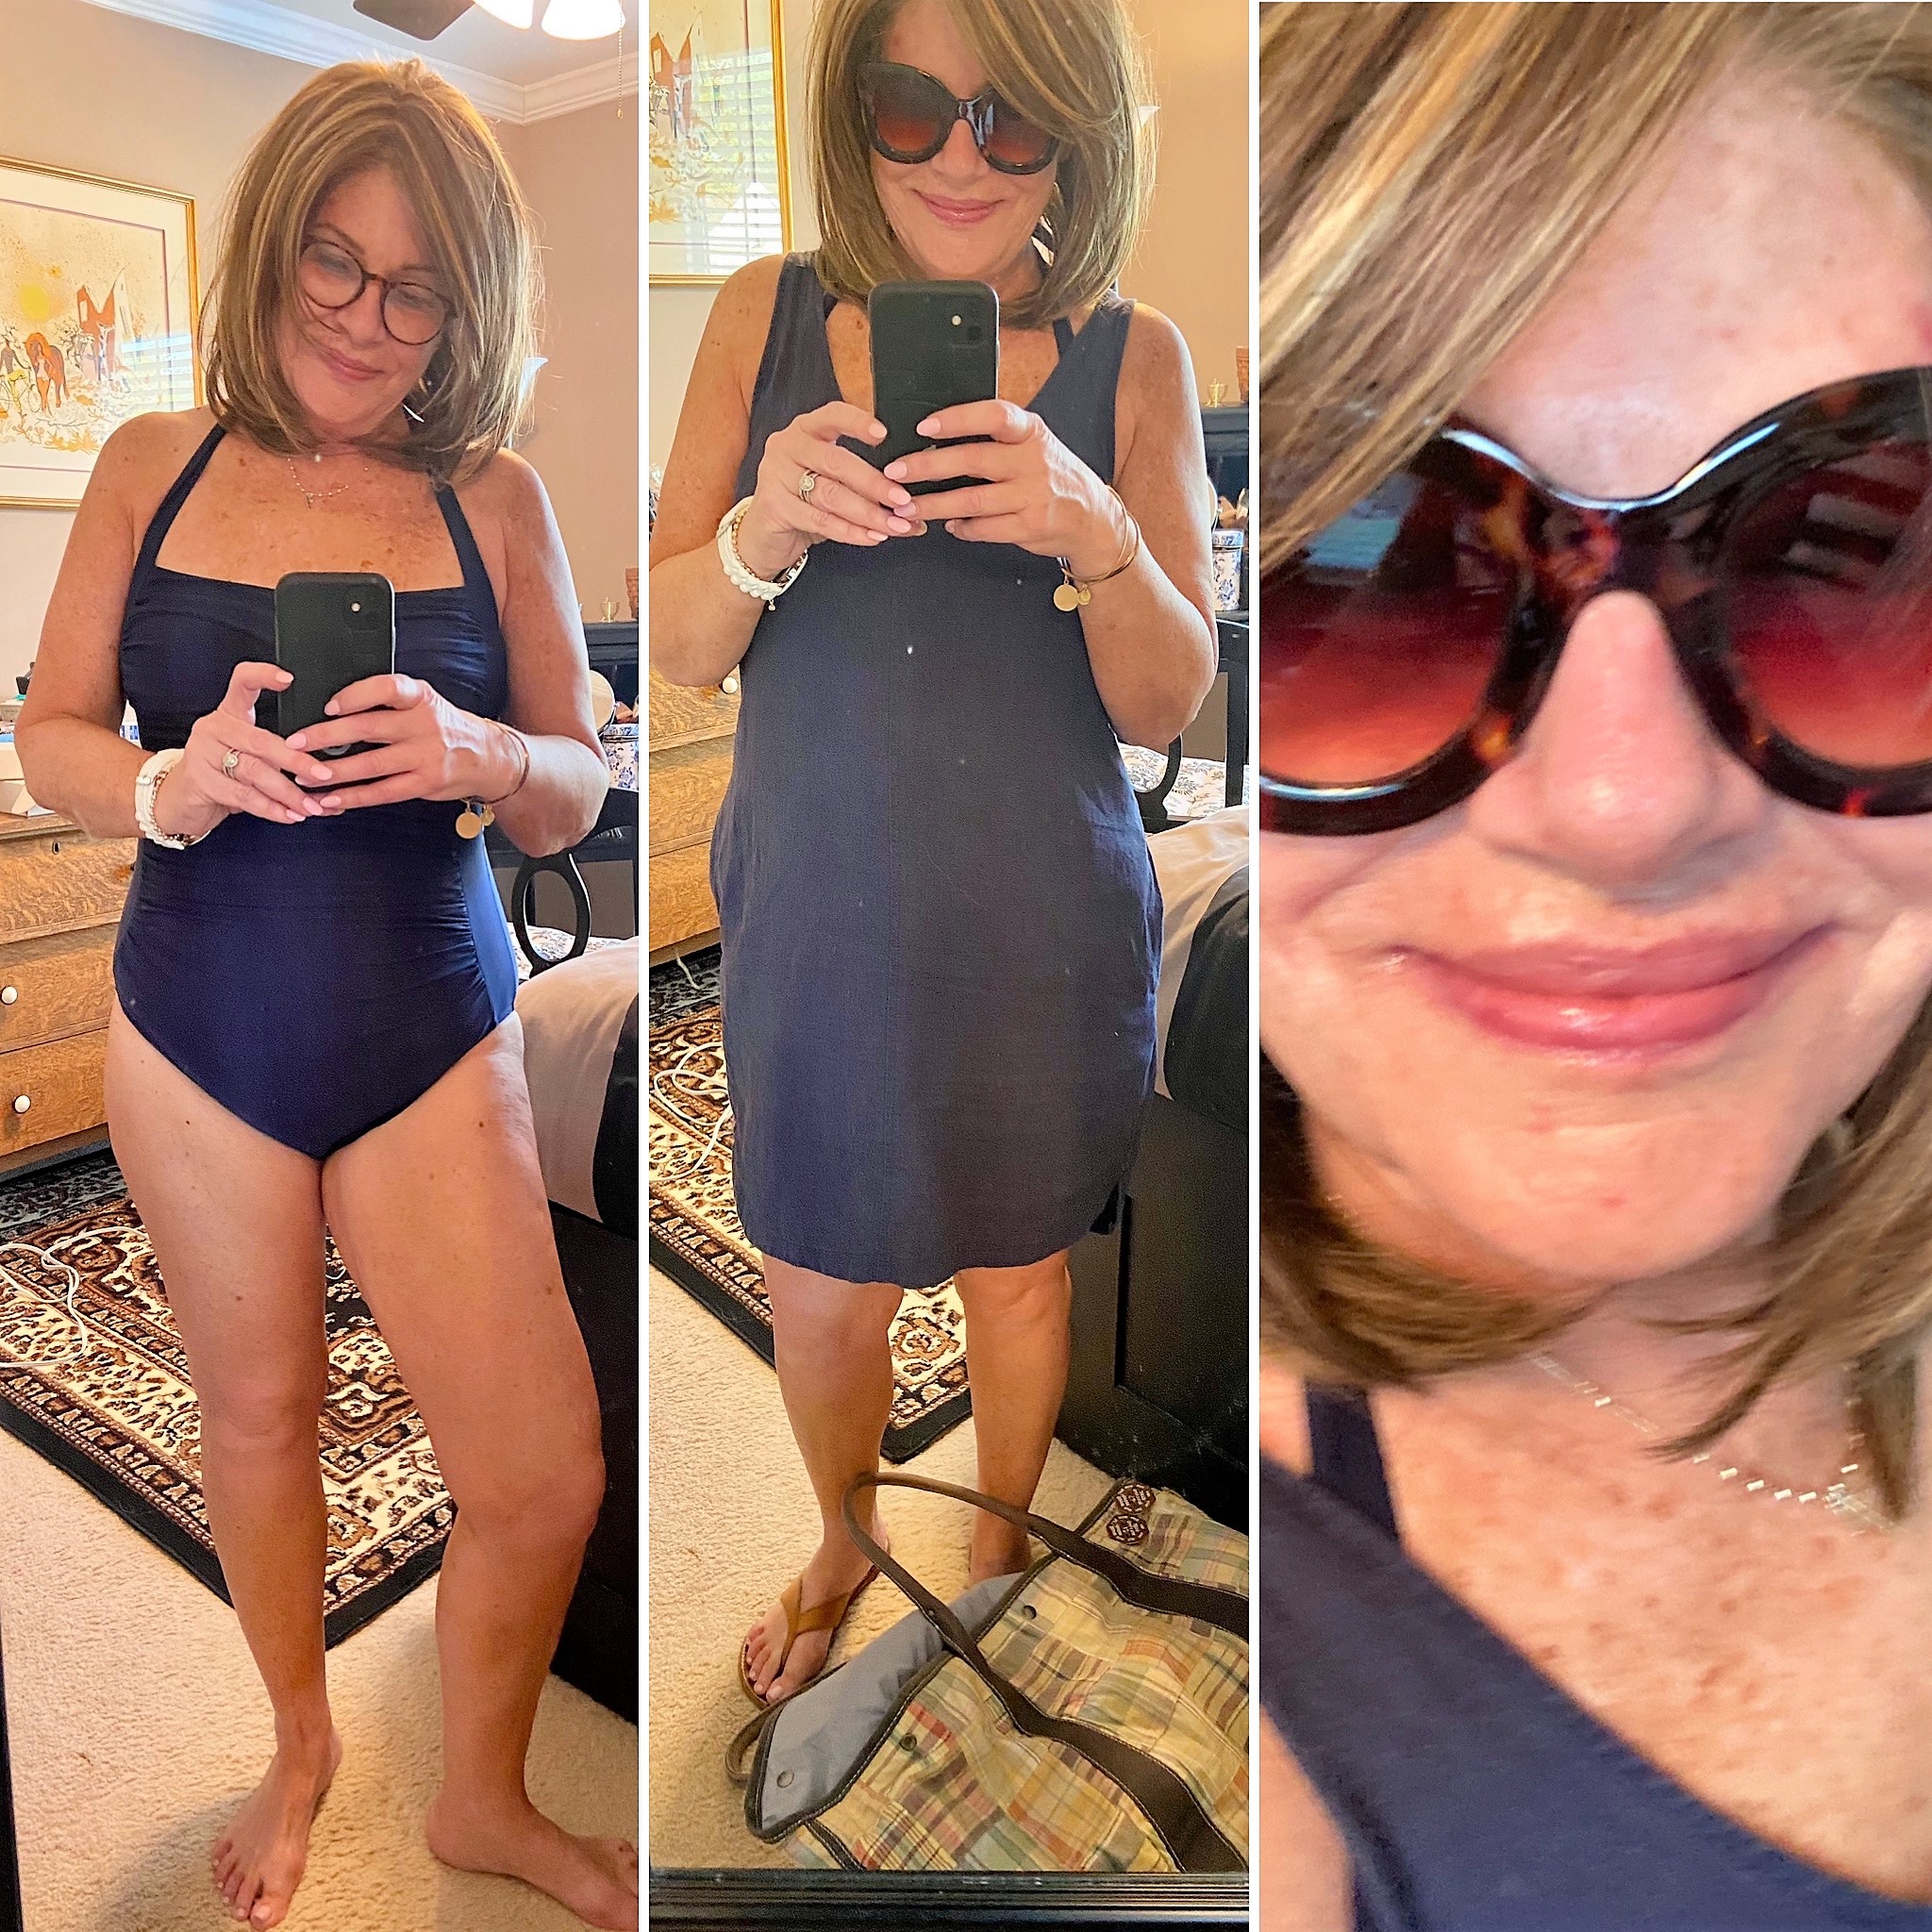 amber barclay recommends mature women in swimsuits tumblr pic